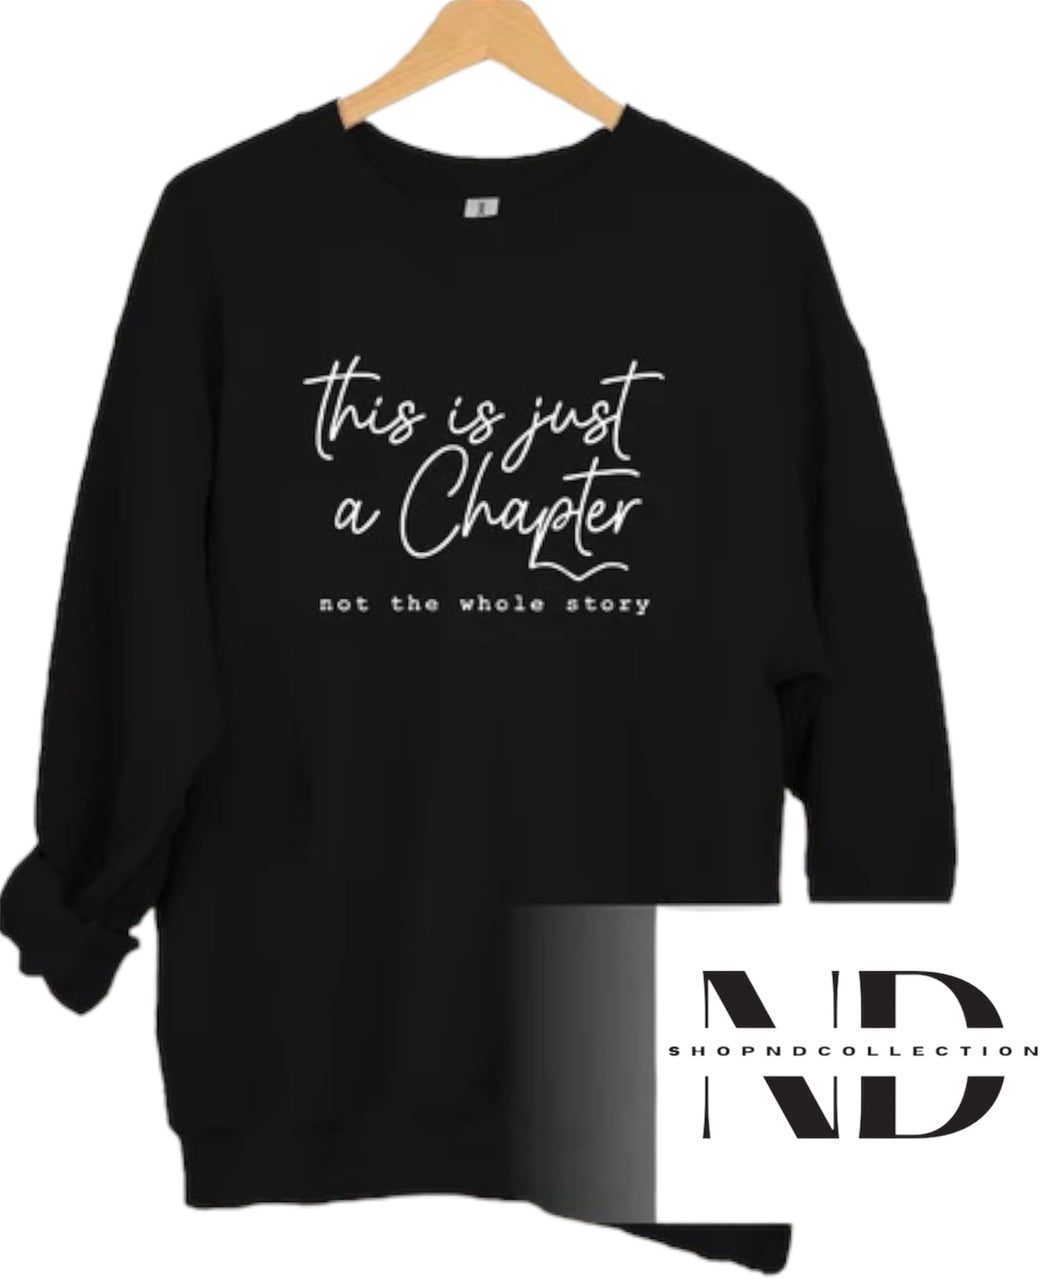 “This is just a Chapter” crewneck